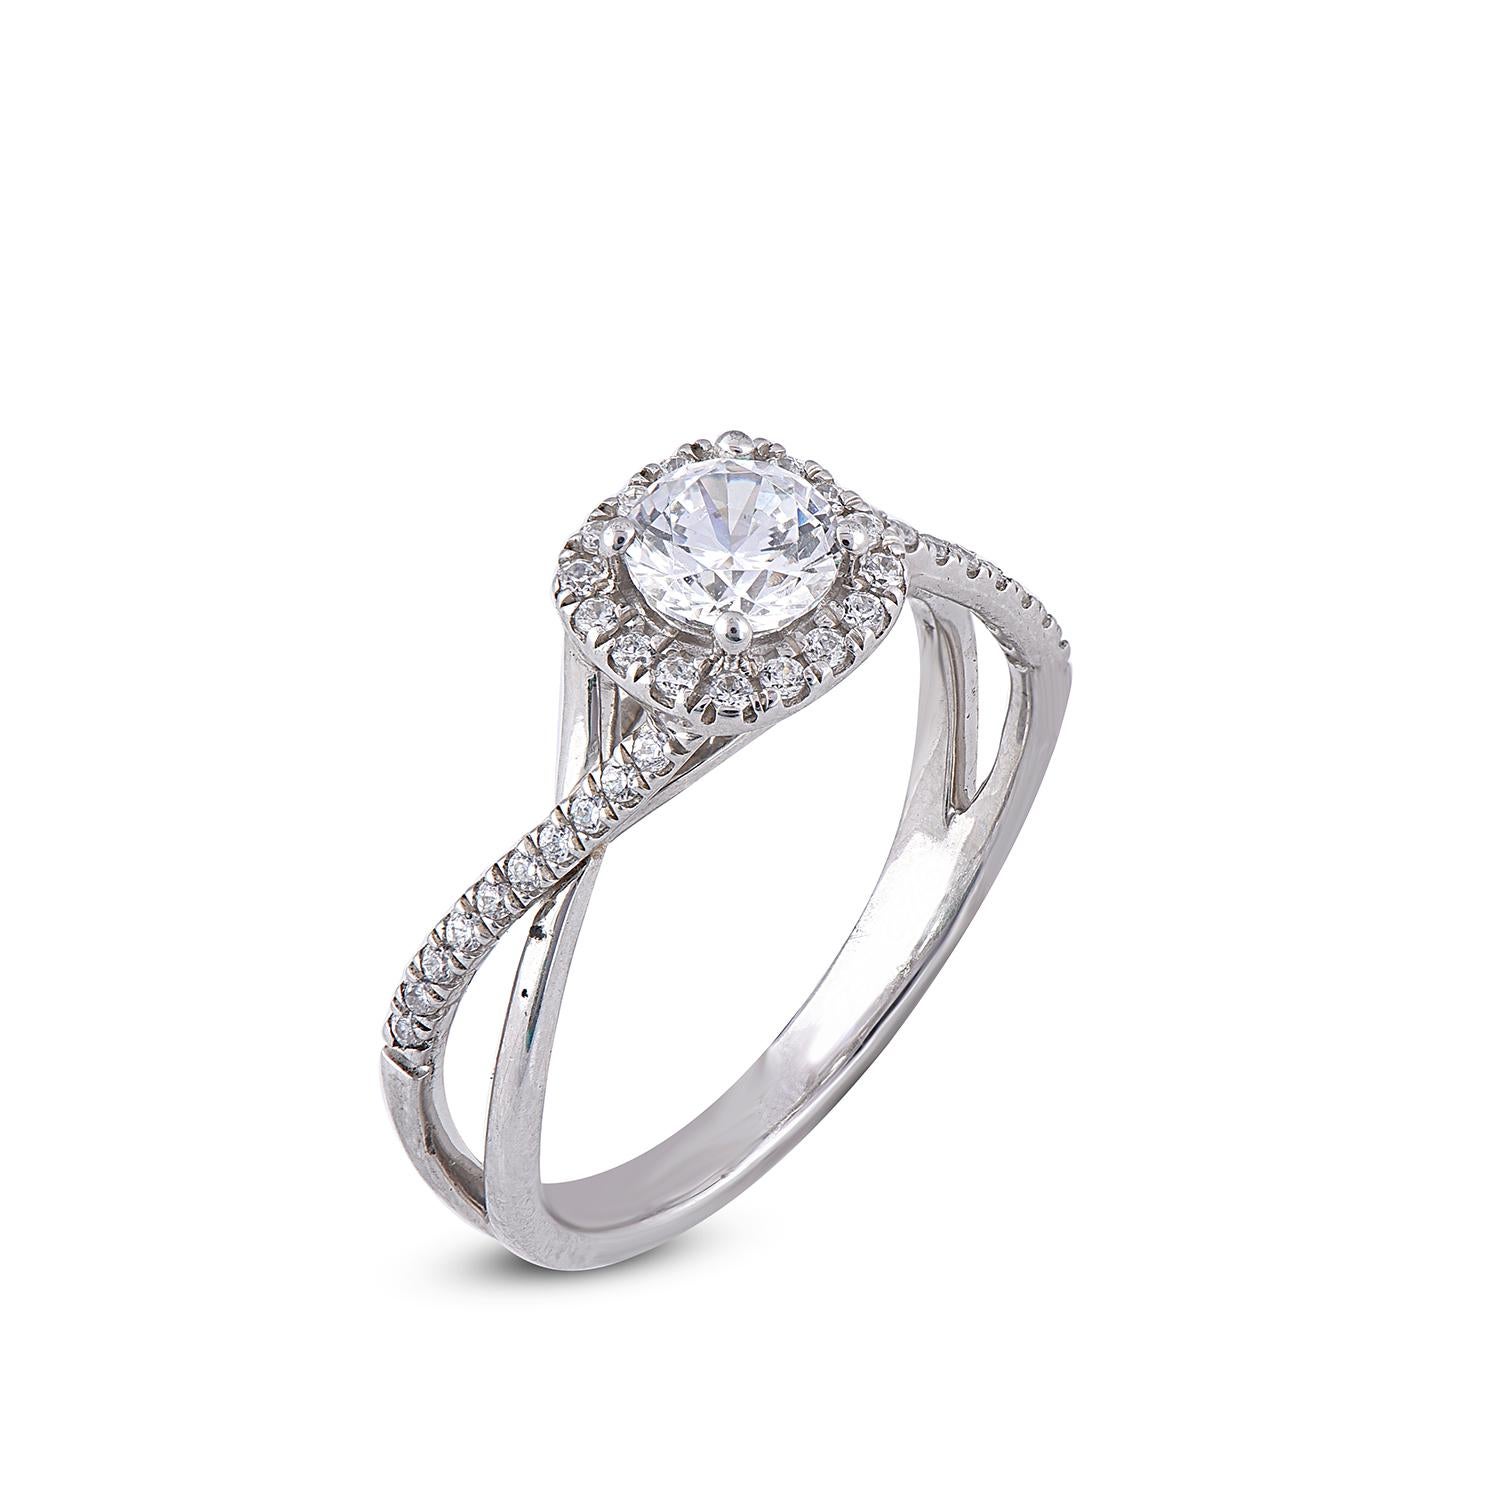 Stunning and classic, this diamond ring is beautifully crafted in 18 karat white gold engagement ring features 0.55 ct of centre stone and 0.20 ct lined with rows of 36 round sparkling diamonds in secured prong settings. The diamonds are natural,